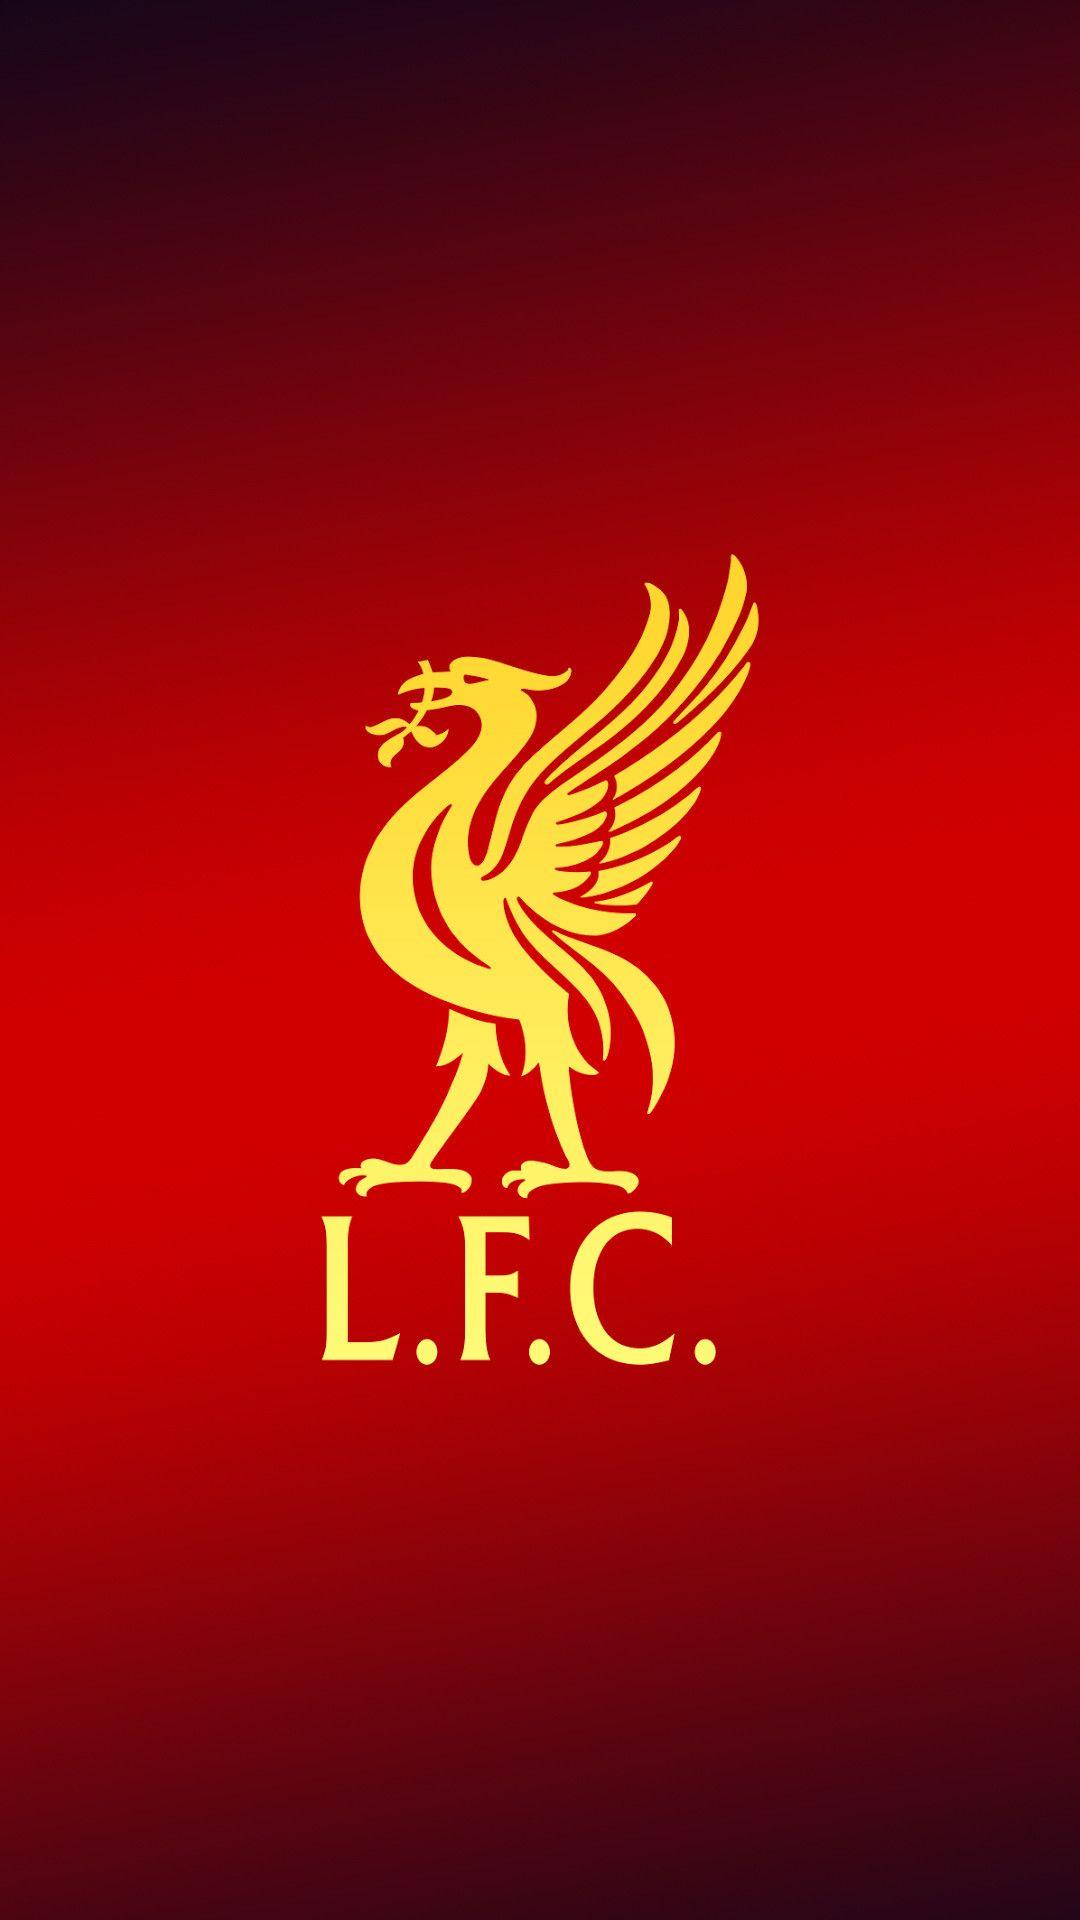 Liverpool Wallpaper Free Liverpool Background